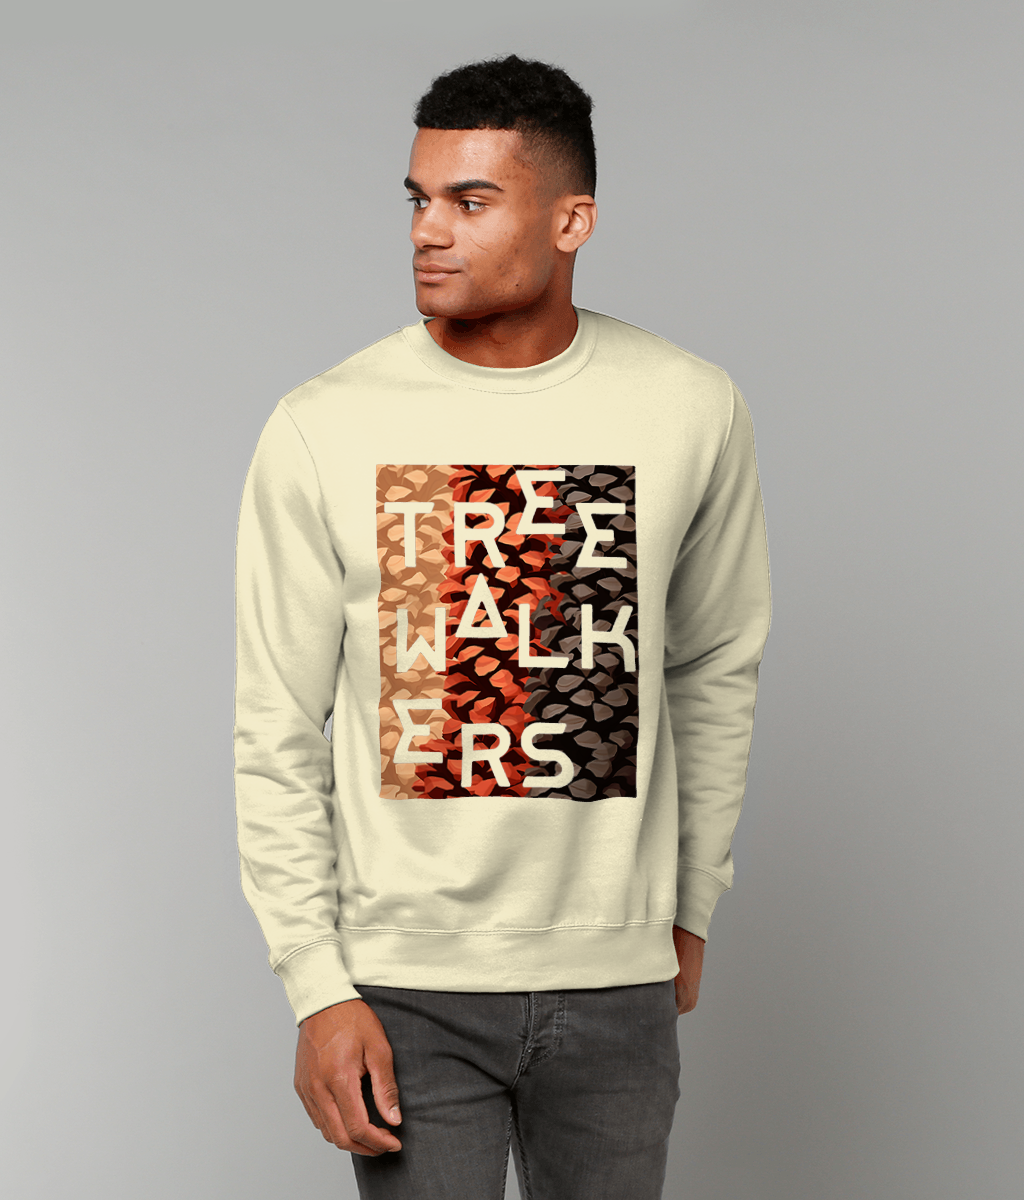 Treewalkers Tricolor Pinecone Graphic Sweater